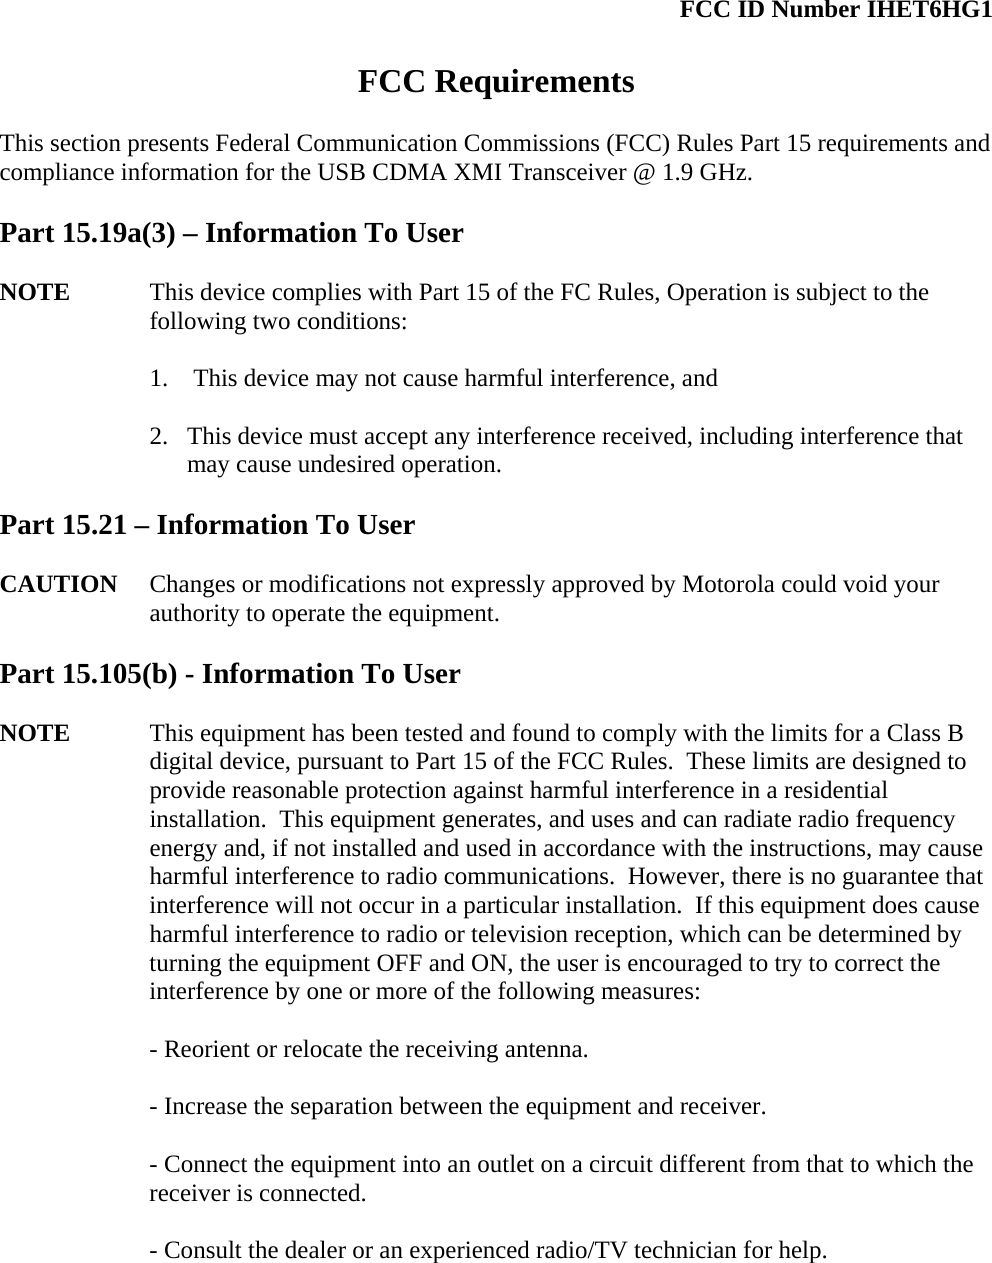  FCC ID Number IHET6HG1  FCC Requirements  This section presents Federal Communication Commissions (FCC) Rules Part 15 requirements and compliance information for the USB CDMA XMI Transceiver @ 1.9 GHz.  Part 15.19a(3) – Information To User  NOTE  This device complies with Part 15 of the FC Rules, Operation is subject to the following two conditions:  1.  This device may not cause harmful interference, and  2. This device must accept any interference received, including interference that may cause undesired operation.  Part 15.21 – Information To User  CAUTION Changes or modifications not expressly approved by Motorola could void your authority to operate the equipment.  Part 15.105(b) - Information To User  NOTE  This equipment has been tested and found to comply with the limits for a Class B digital device, pursuant to Part 15 of the FCC Rules.  These limits are designed to provide reasonable protection against harmful interference in a residential installation.  This equipment generates, and uses and can radiate radio frequency energy and, if not installed and used in accordance with the instructions, may cause harmful interference to radio communications.  However, there is no guarantee that interference will not occur in a particular installation.  If this equipment does cause harmful interference to radio or television reception, which can be determined by turning the equipment OFF and ON, the user is encouraged to try to correct the interference by one or more of the following measures:  - Reorient or relocate the receiving antenna.  - Increase the separation between the equipment and receiver.  - Connect the equipment into an outlet on a circuit different from that to which the receiver is connected.  - Consult the dealer or an experienced radio/TV technician for help. 